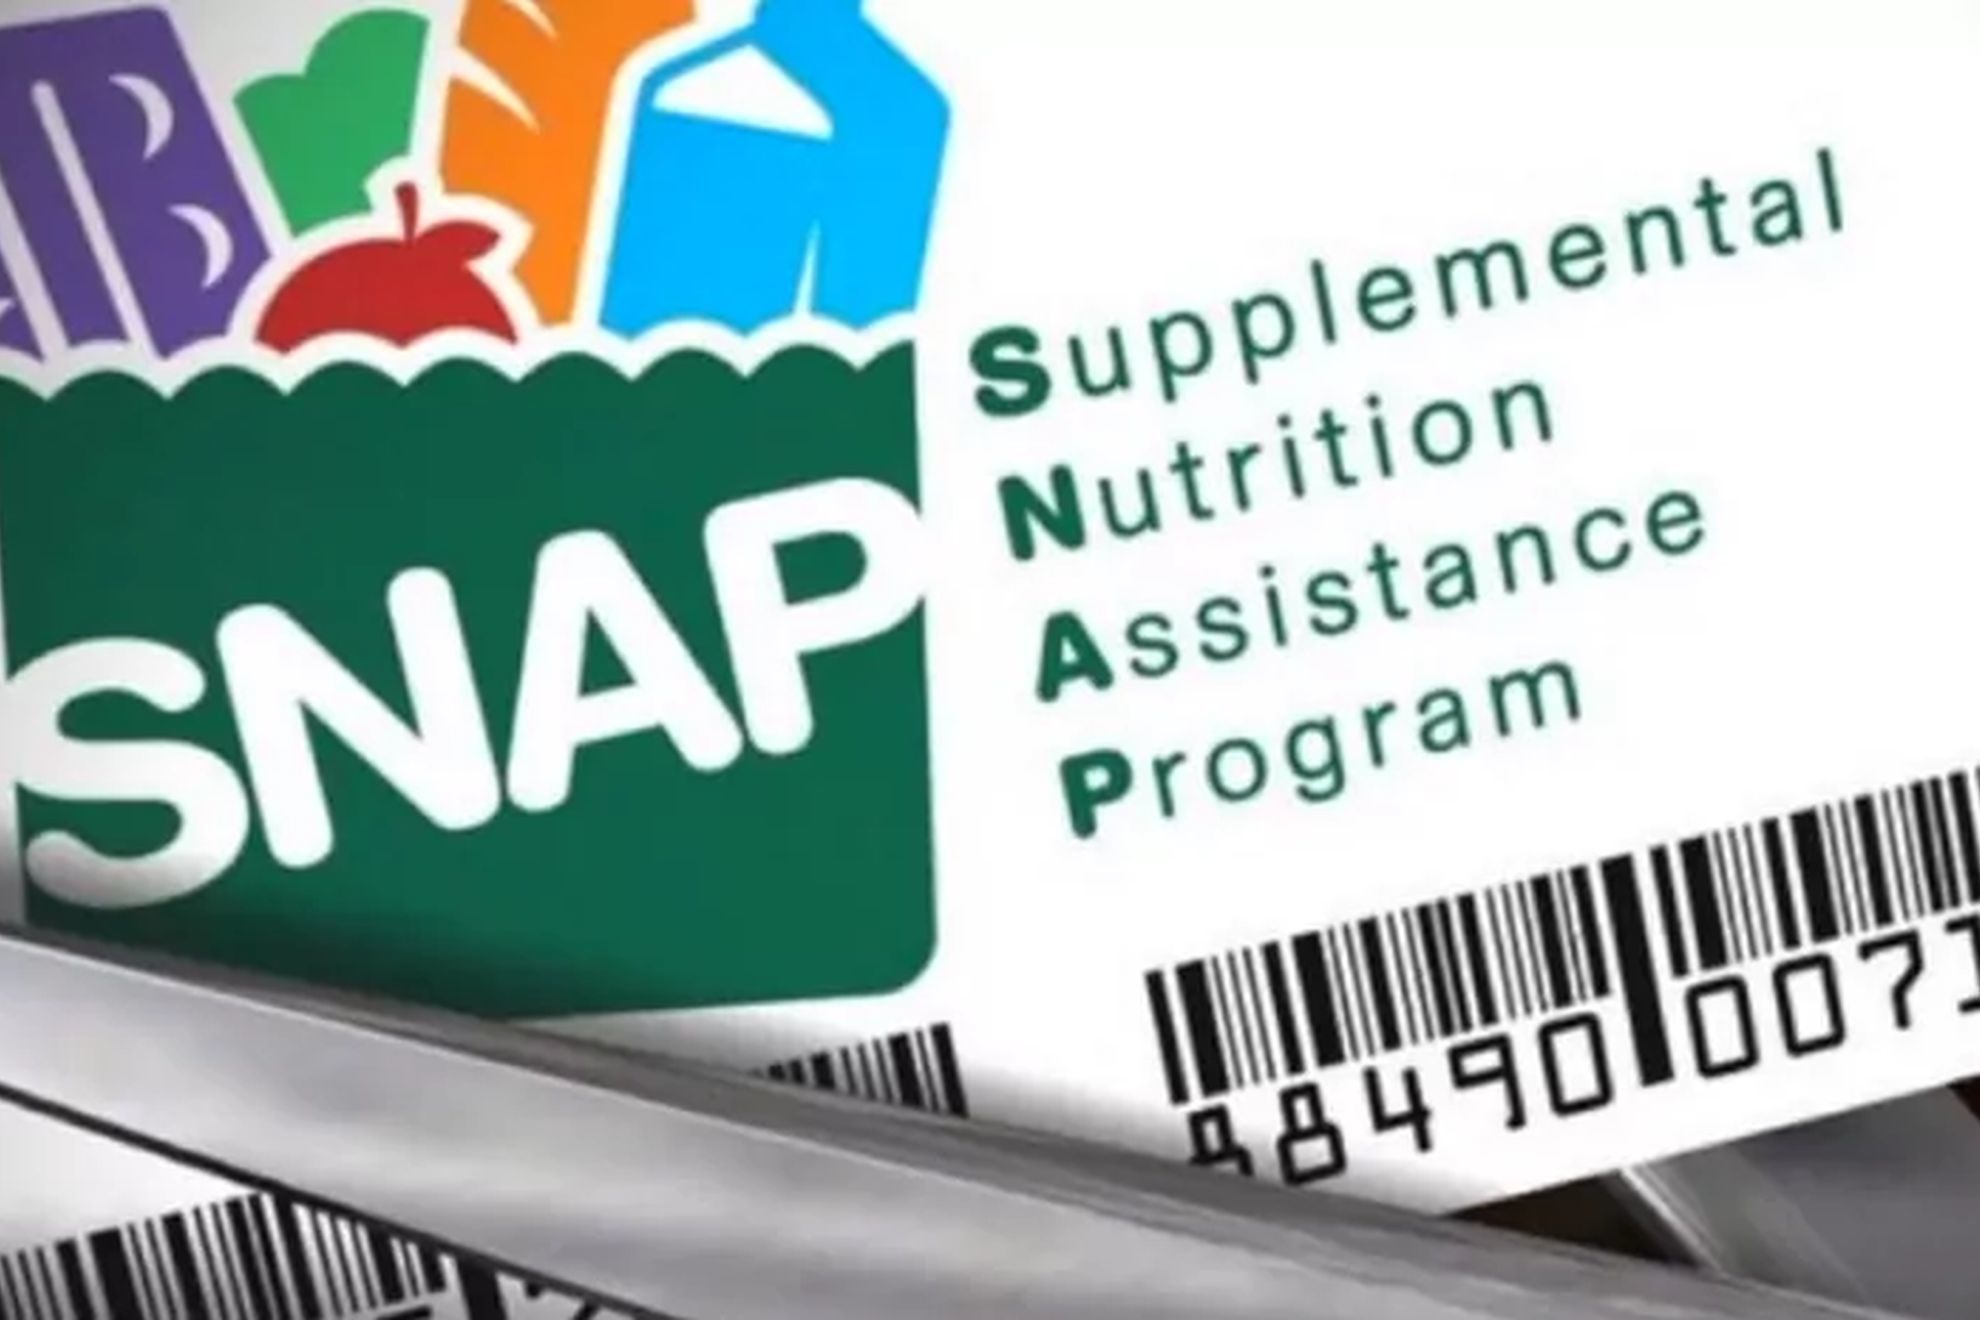 SNAP Benefits: How to apply for Food Stamps online?